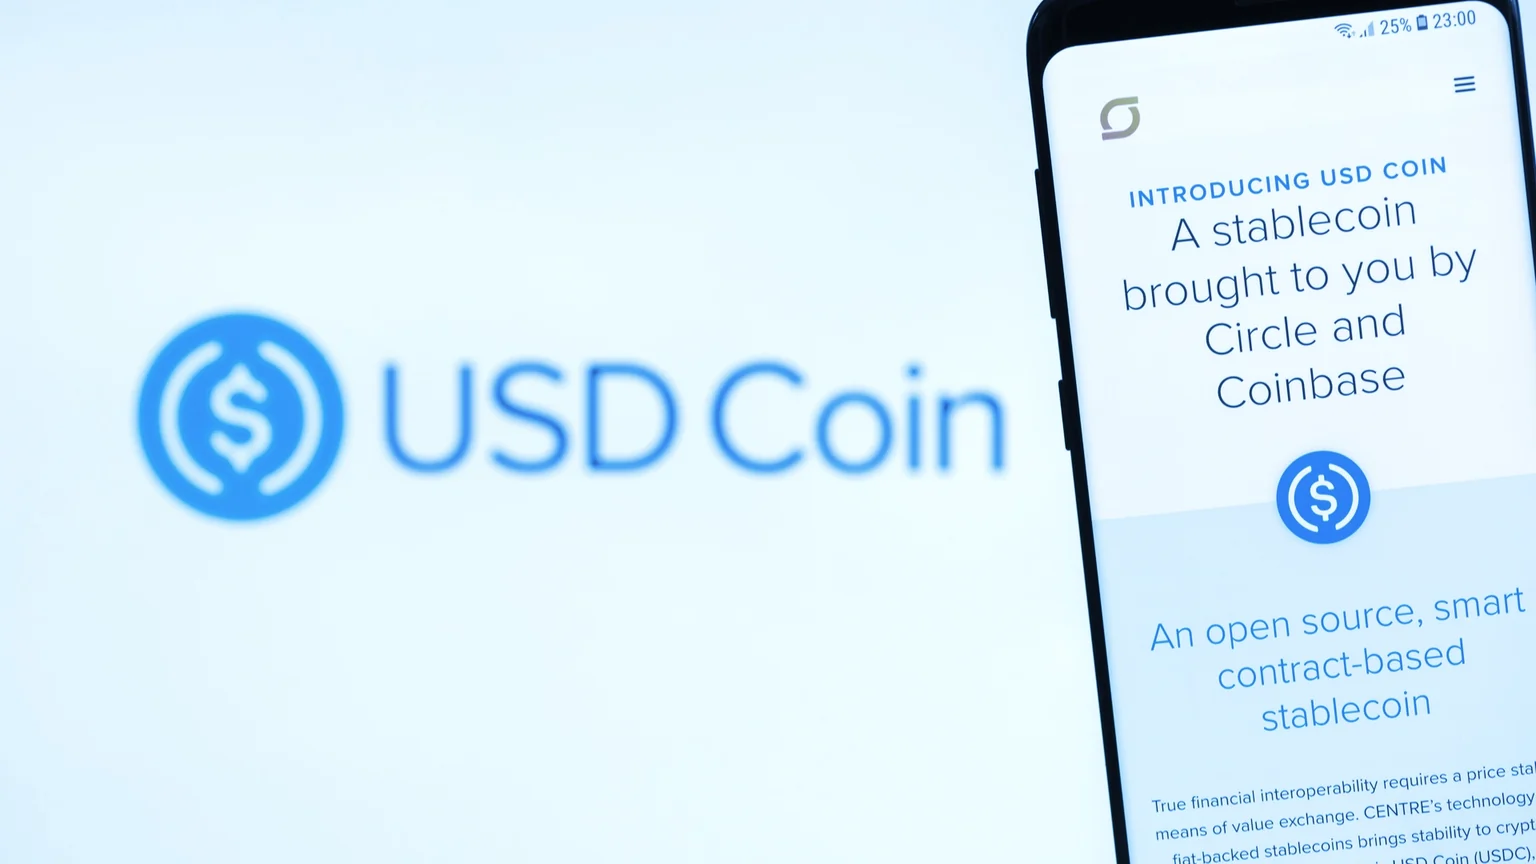 USDC is a stablecoin issued by Centre. Image: Shutterstock